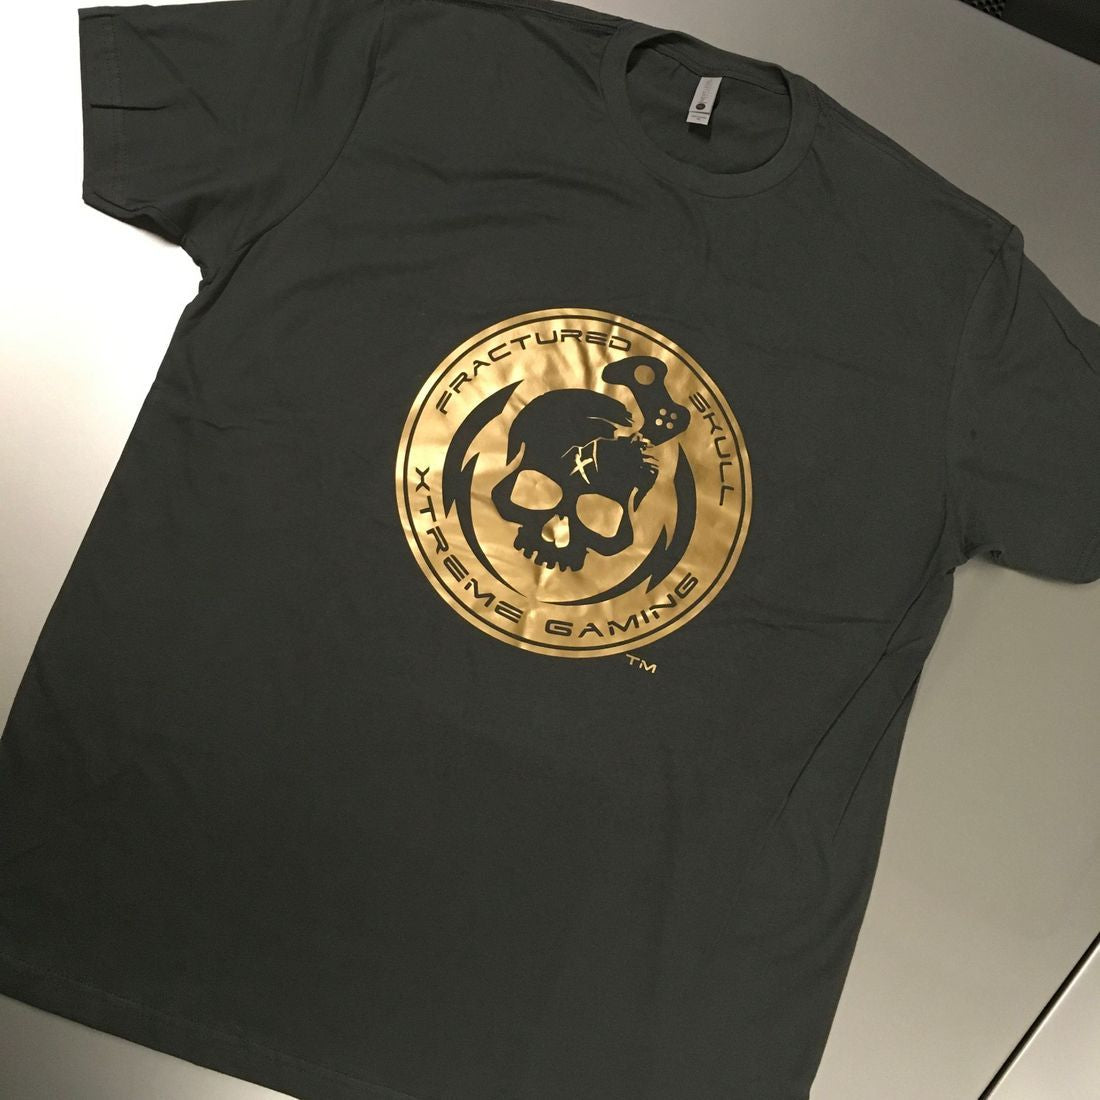 Fractured Skull Xtreme Dark Gray with Flat Gold Tee